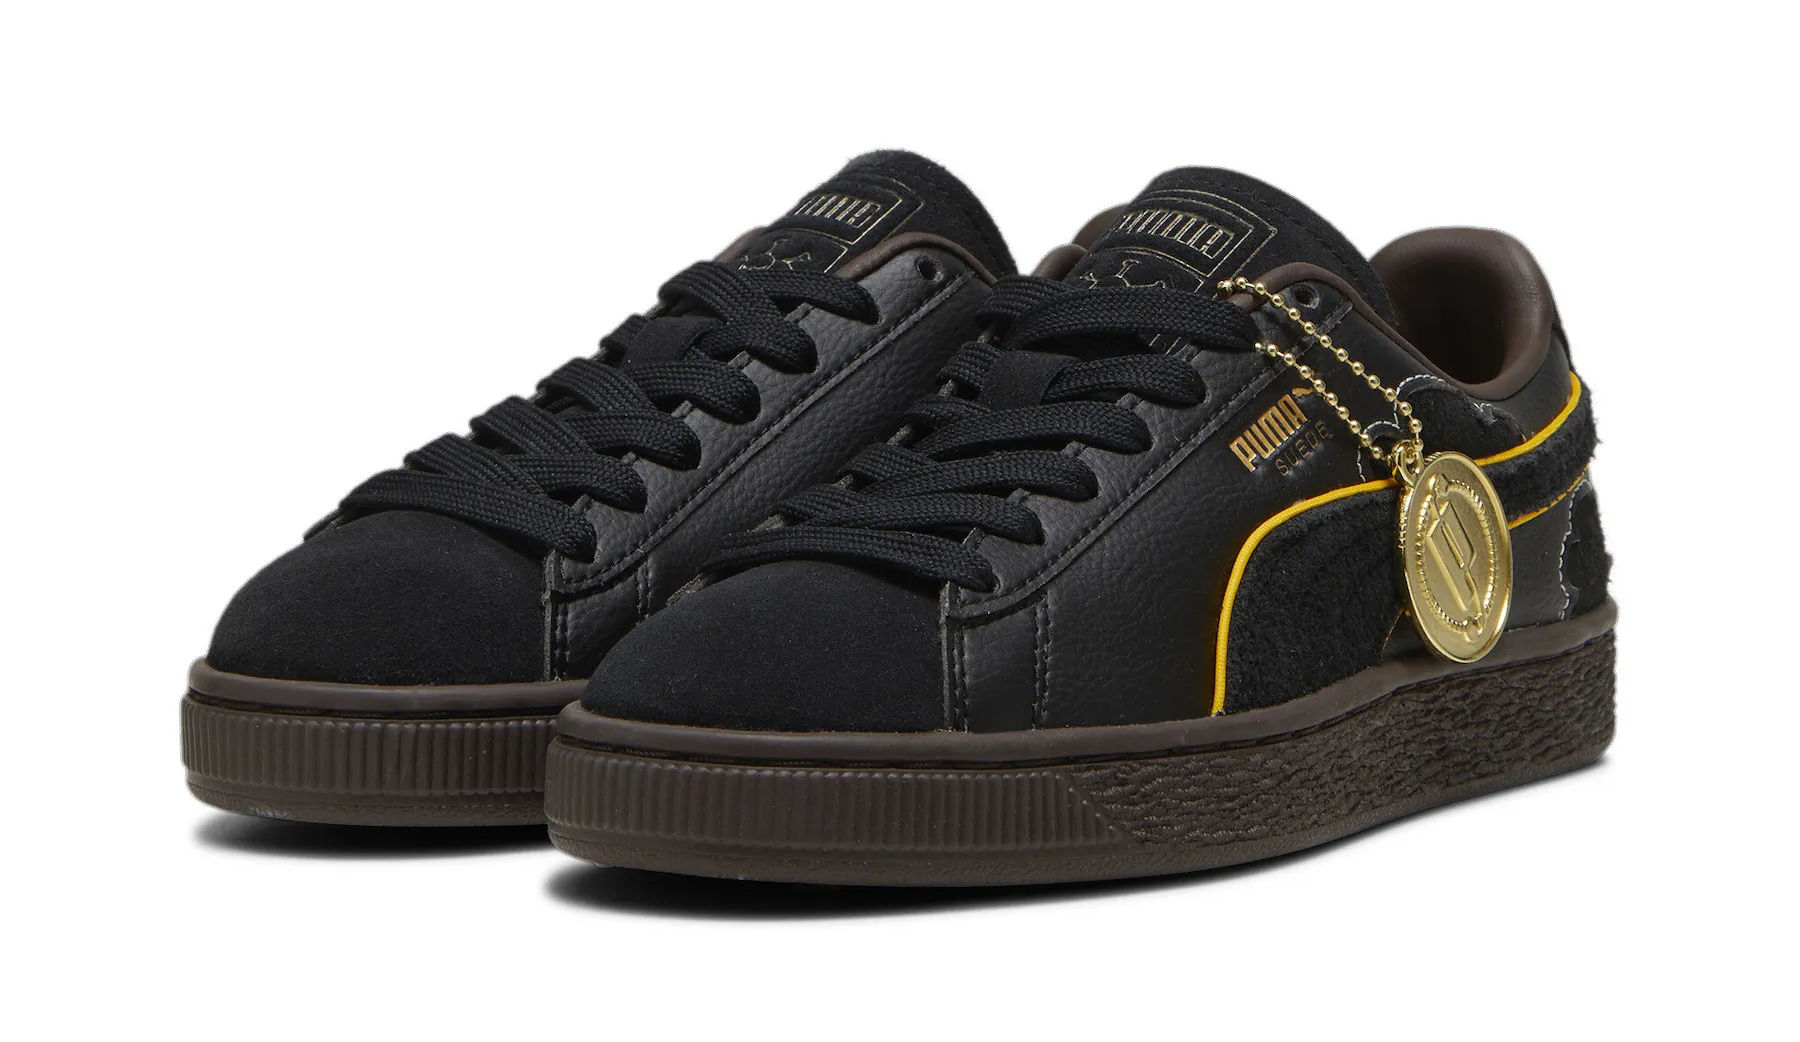 Four Emperors from 'One Piece' inspire latest PUMA Suede pack